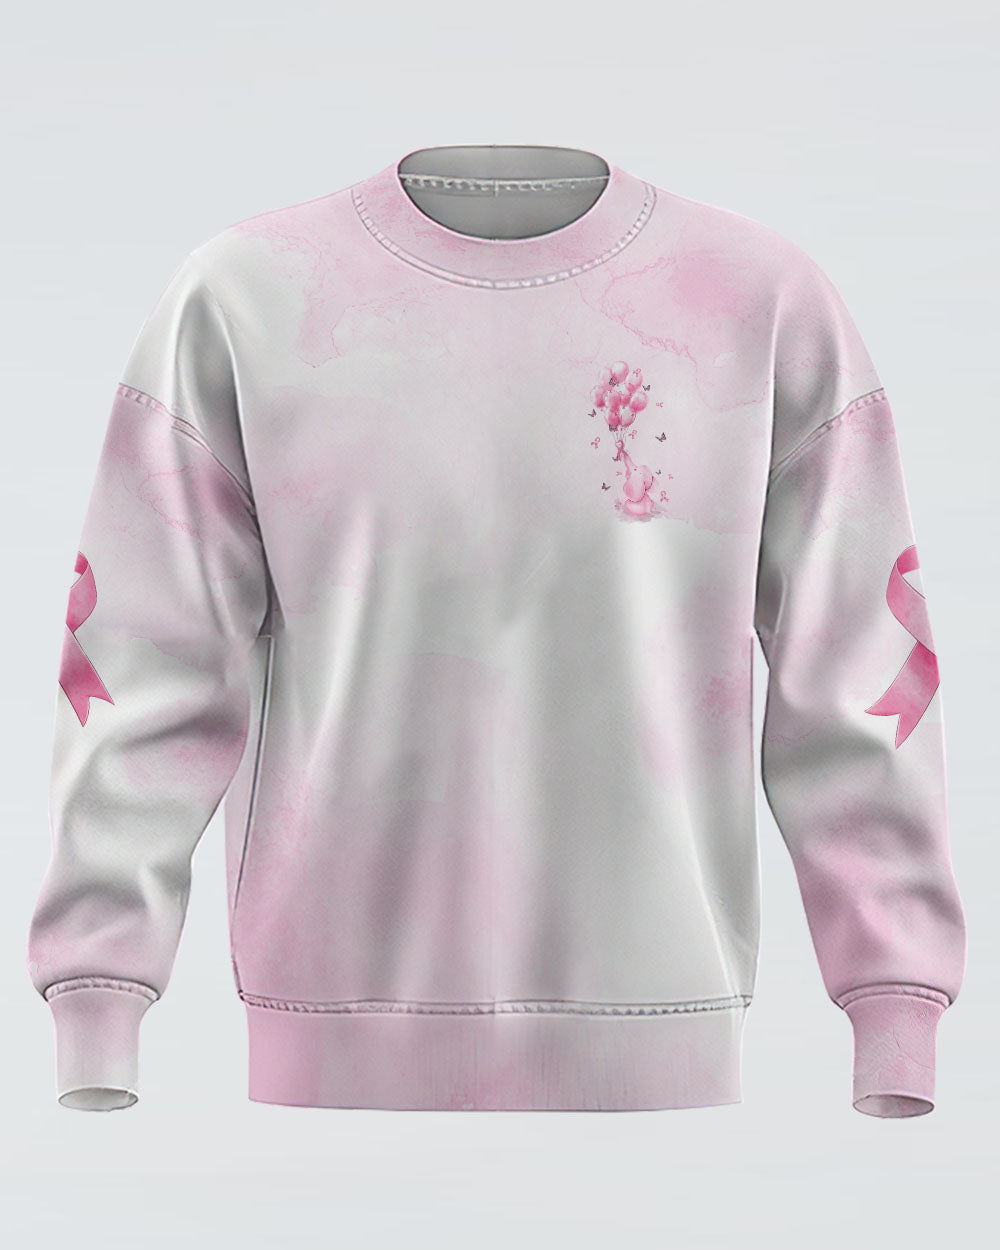 Hope For A Cure Elephant Balloon Women's Breast Cancer Awareness Sweatshirt